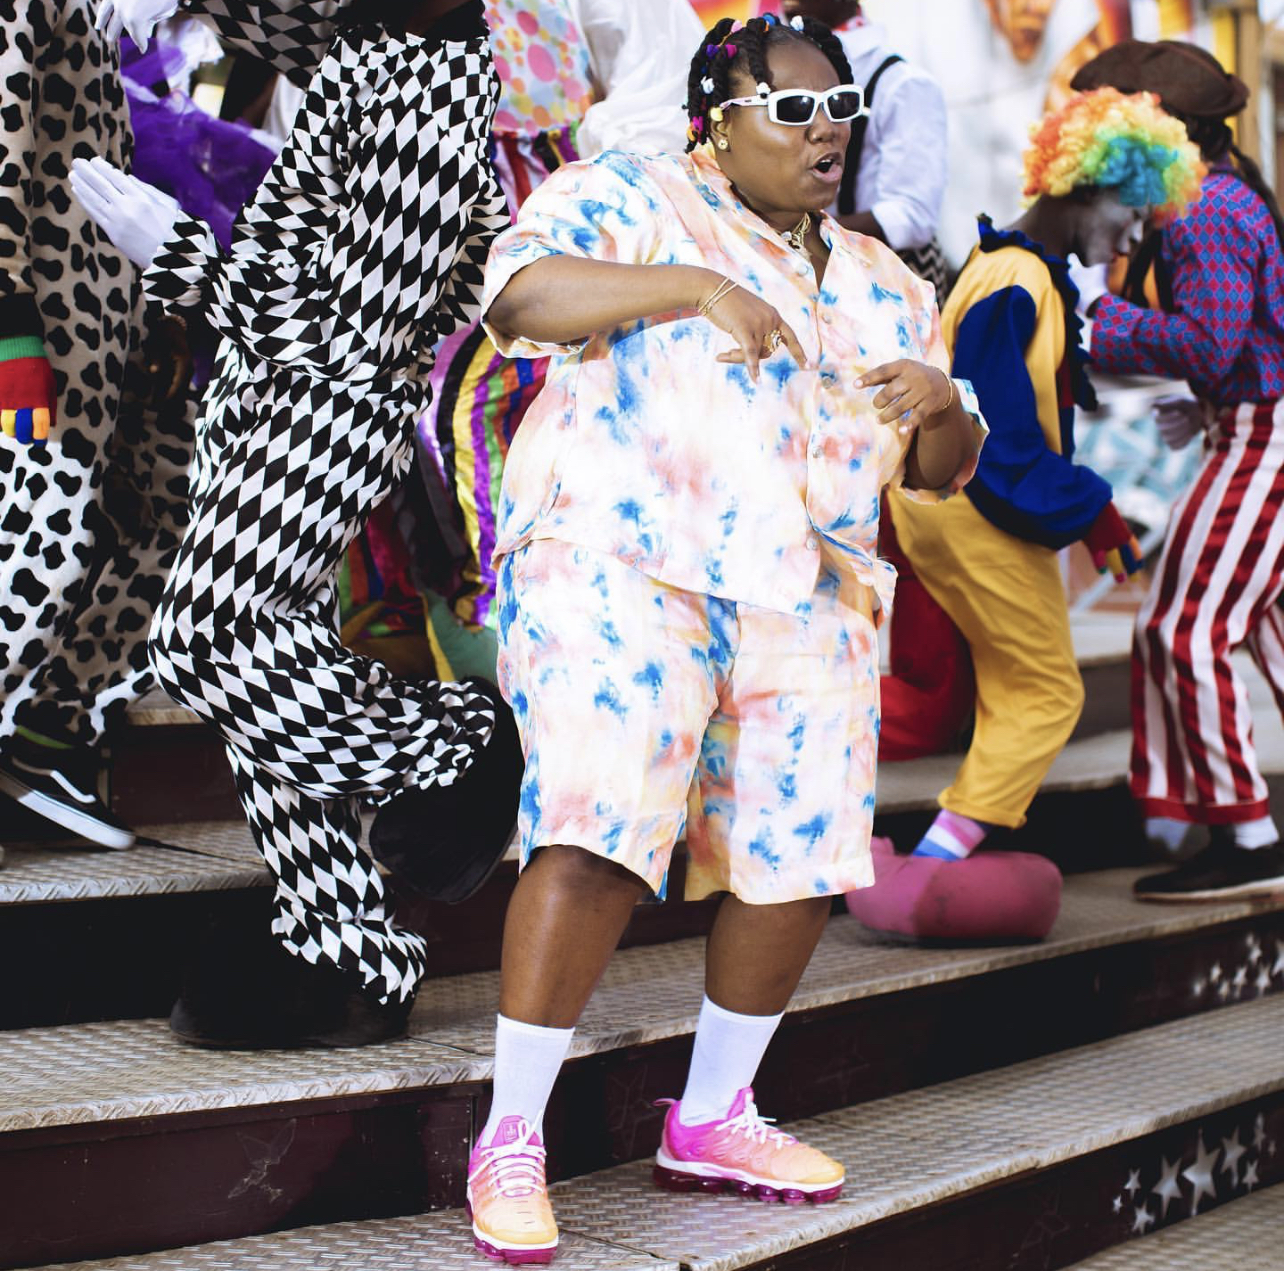 teni-the-entertainer-dancing-on-cover-with-davido-song-for-you-trending-songs-africa